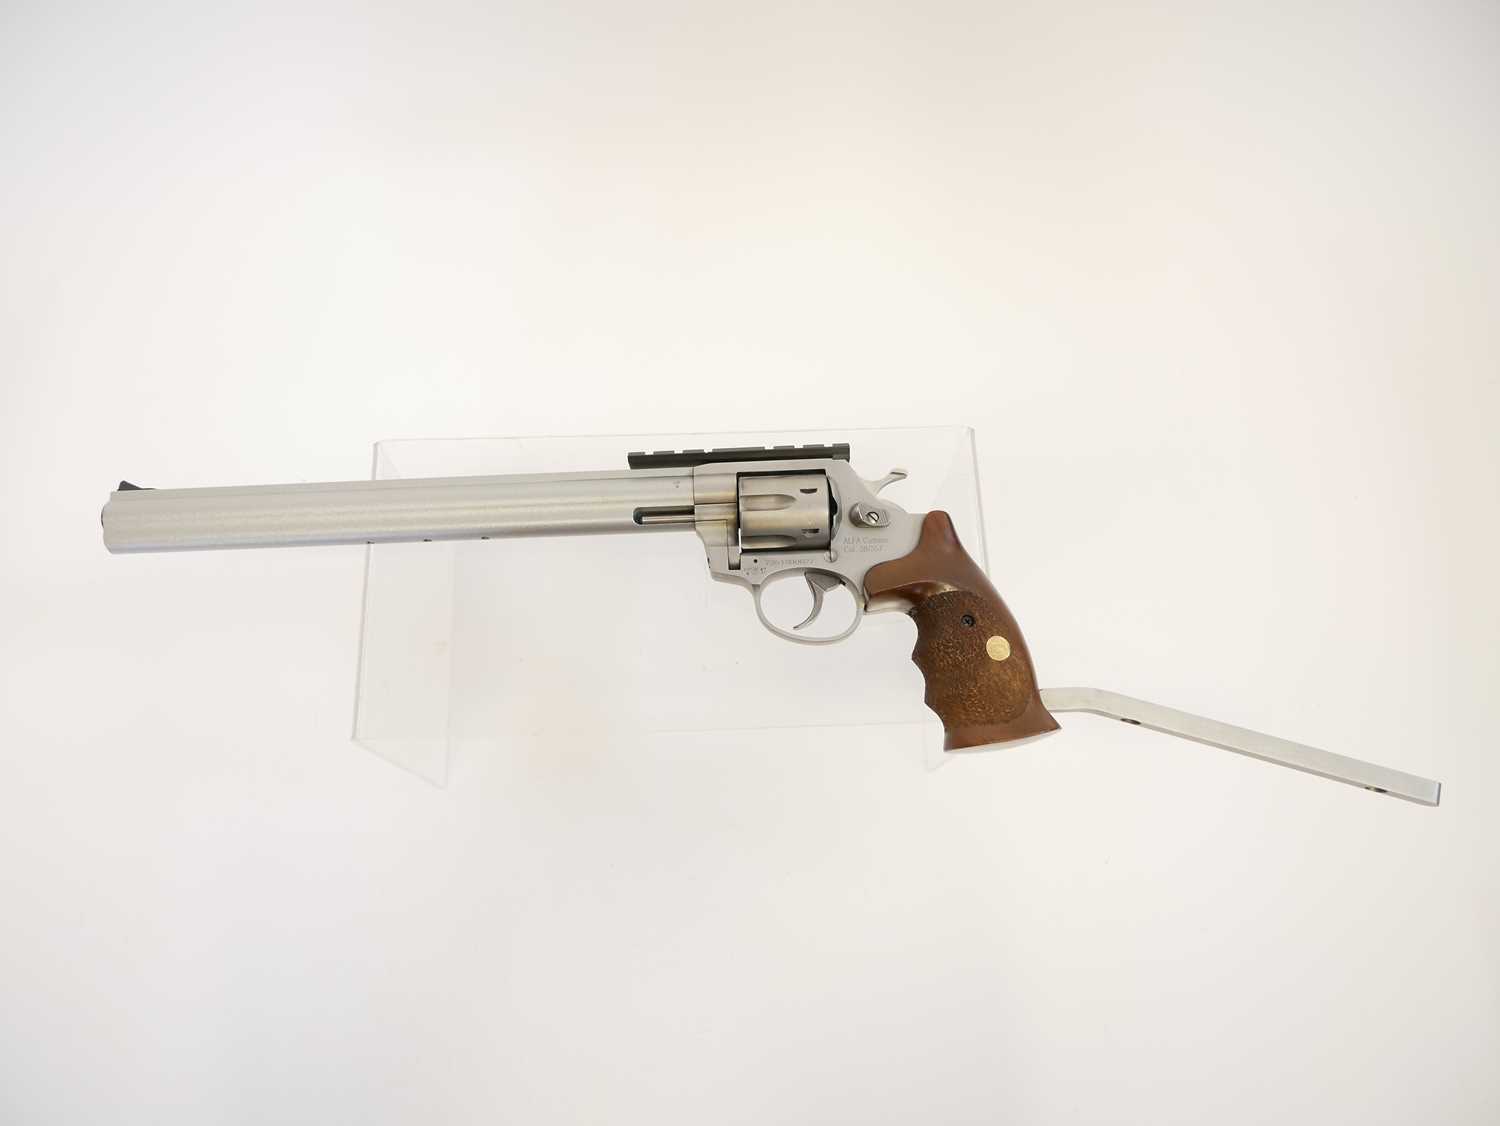 Alfa Brno .357 long barrel revolver, serial number 7351200627, 12 inch barrel, fitted with Picatinny - Image 8 of 13